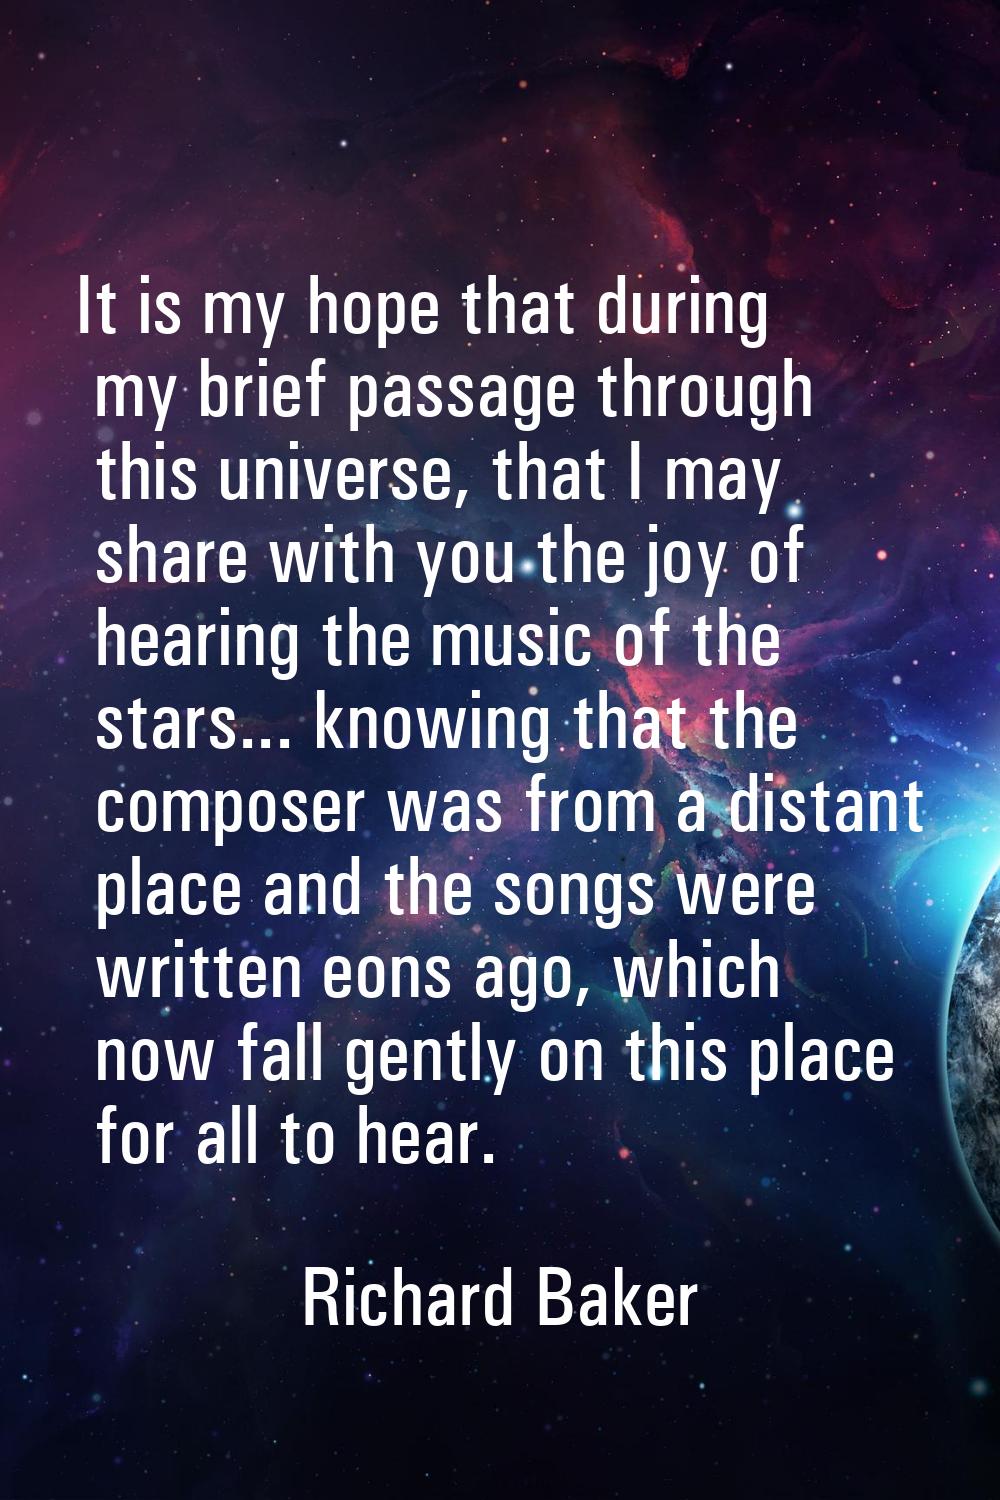 It is my hope that during my brief passage through this universe, that I may share with you the joy